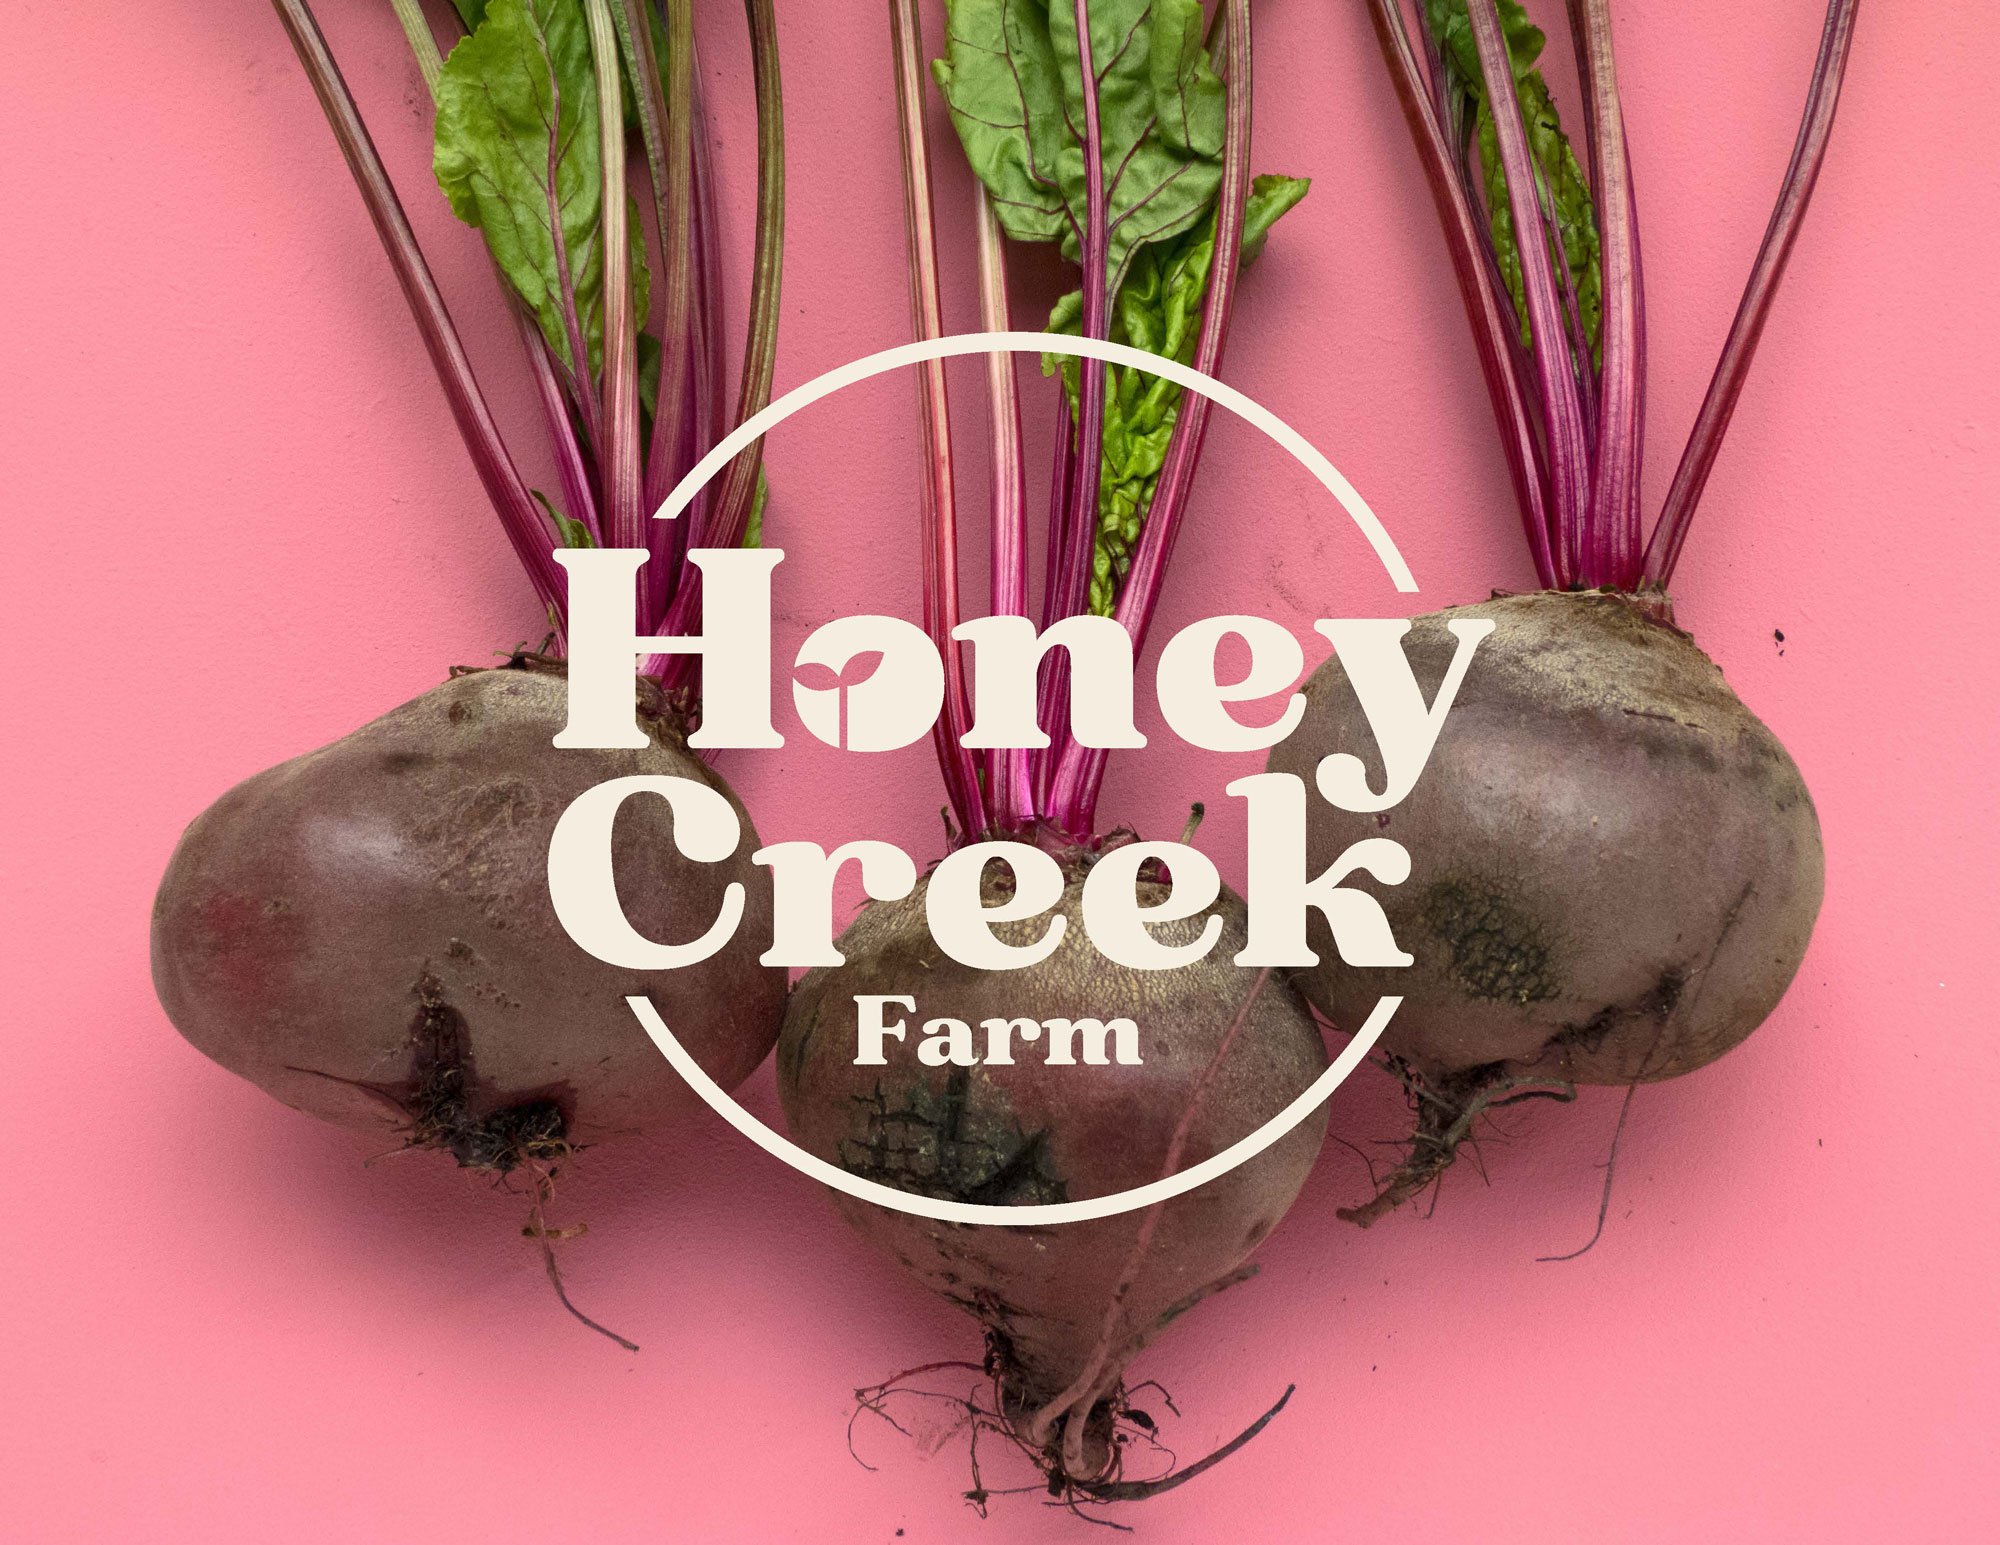  Honey Creek Farm logo overlayed on photo of beets on a pink background. 